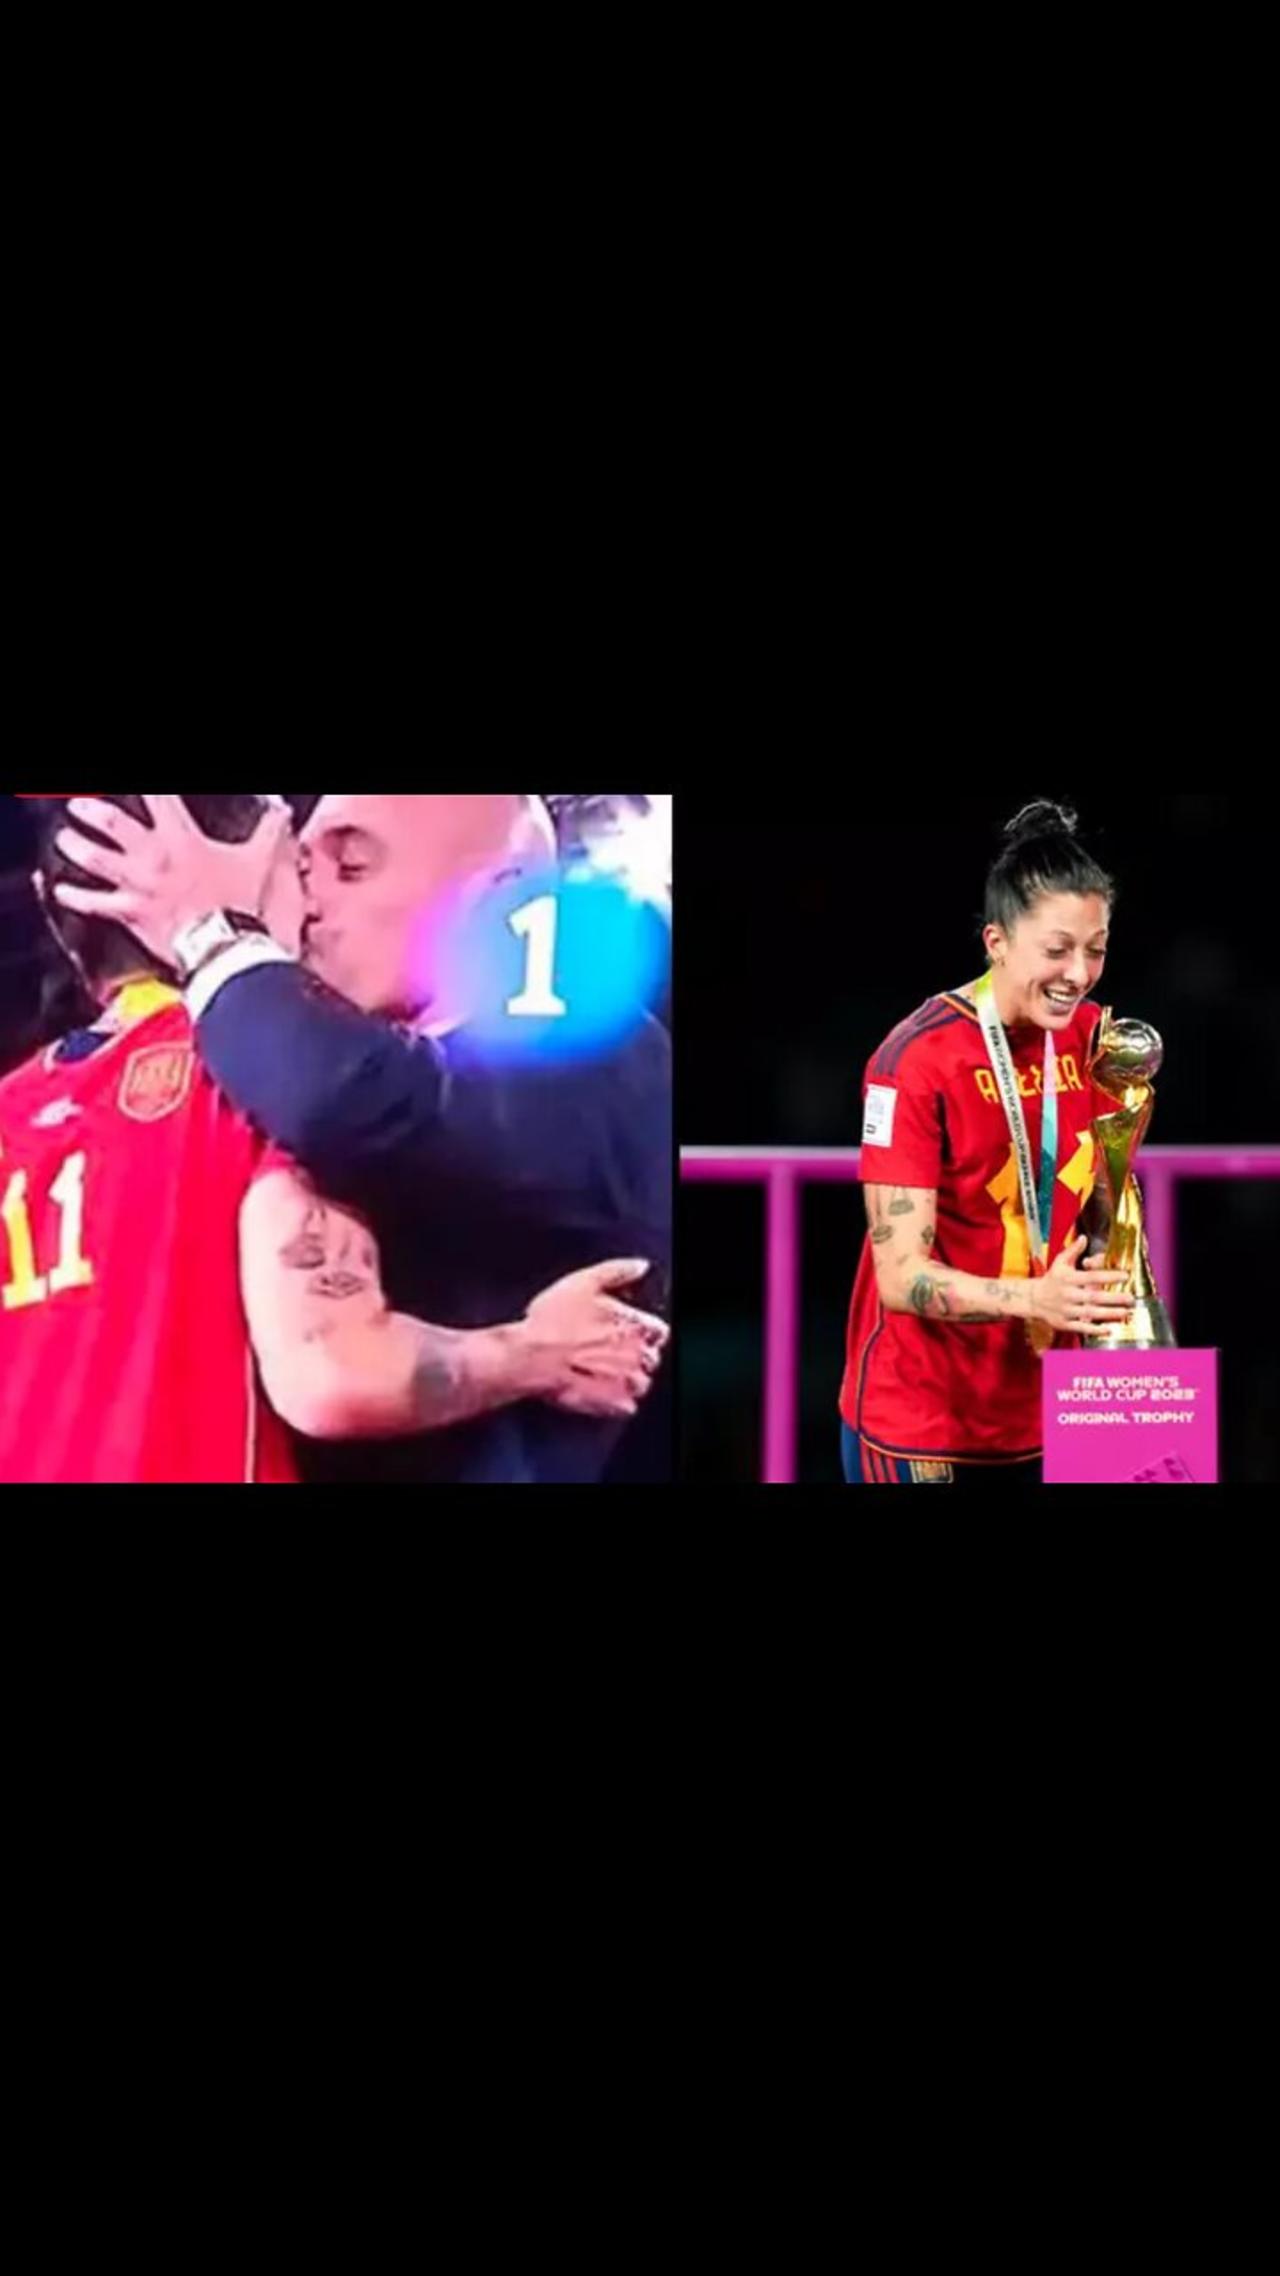 Spanish FA president Luis Rubiales responds after kissing Jenni Hermoso on the lips after World Cup